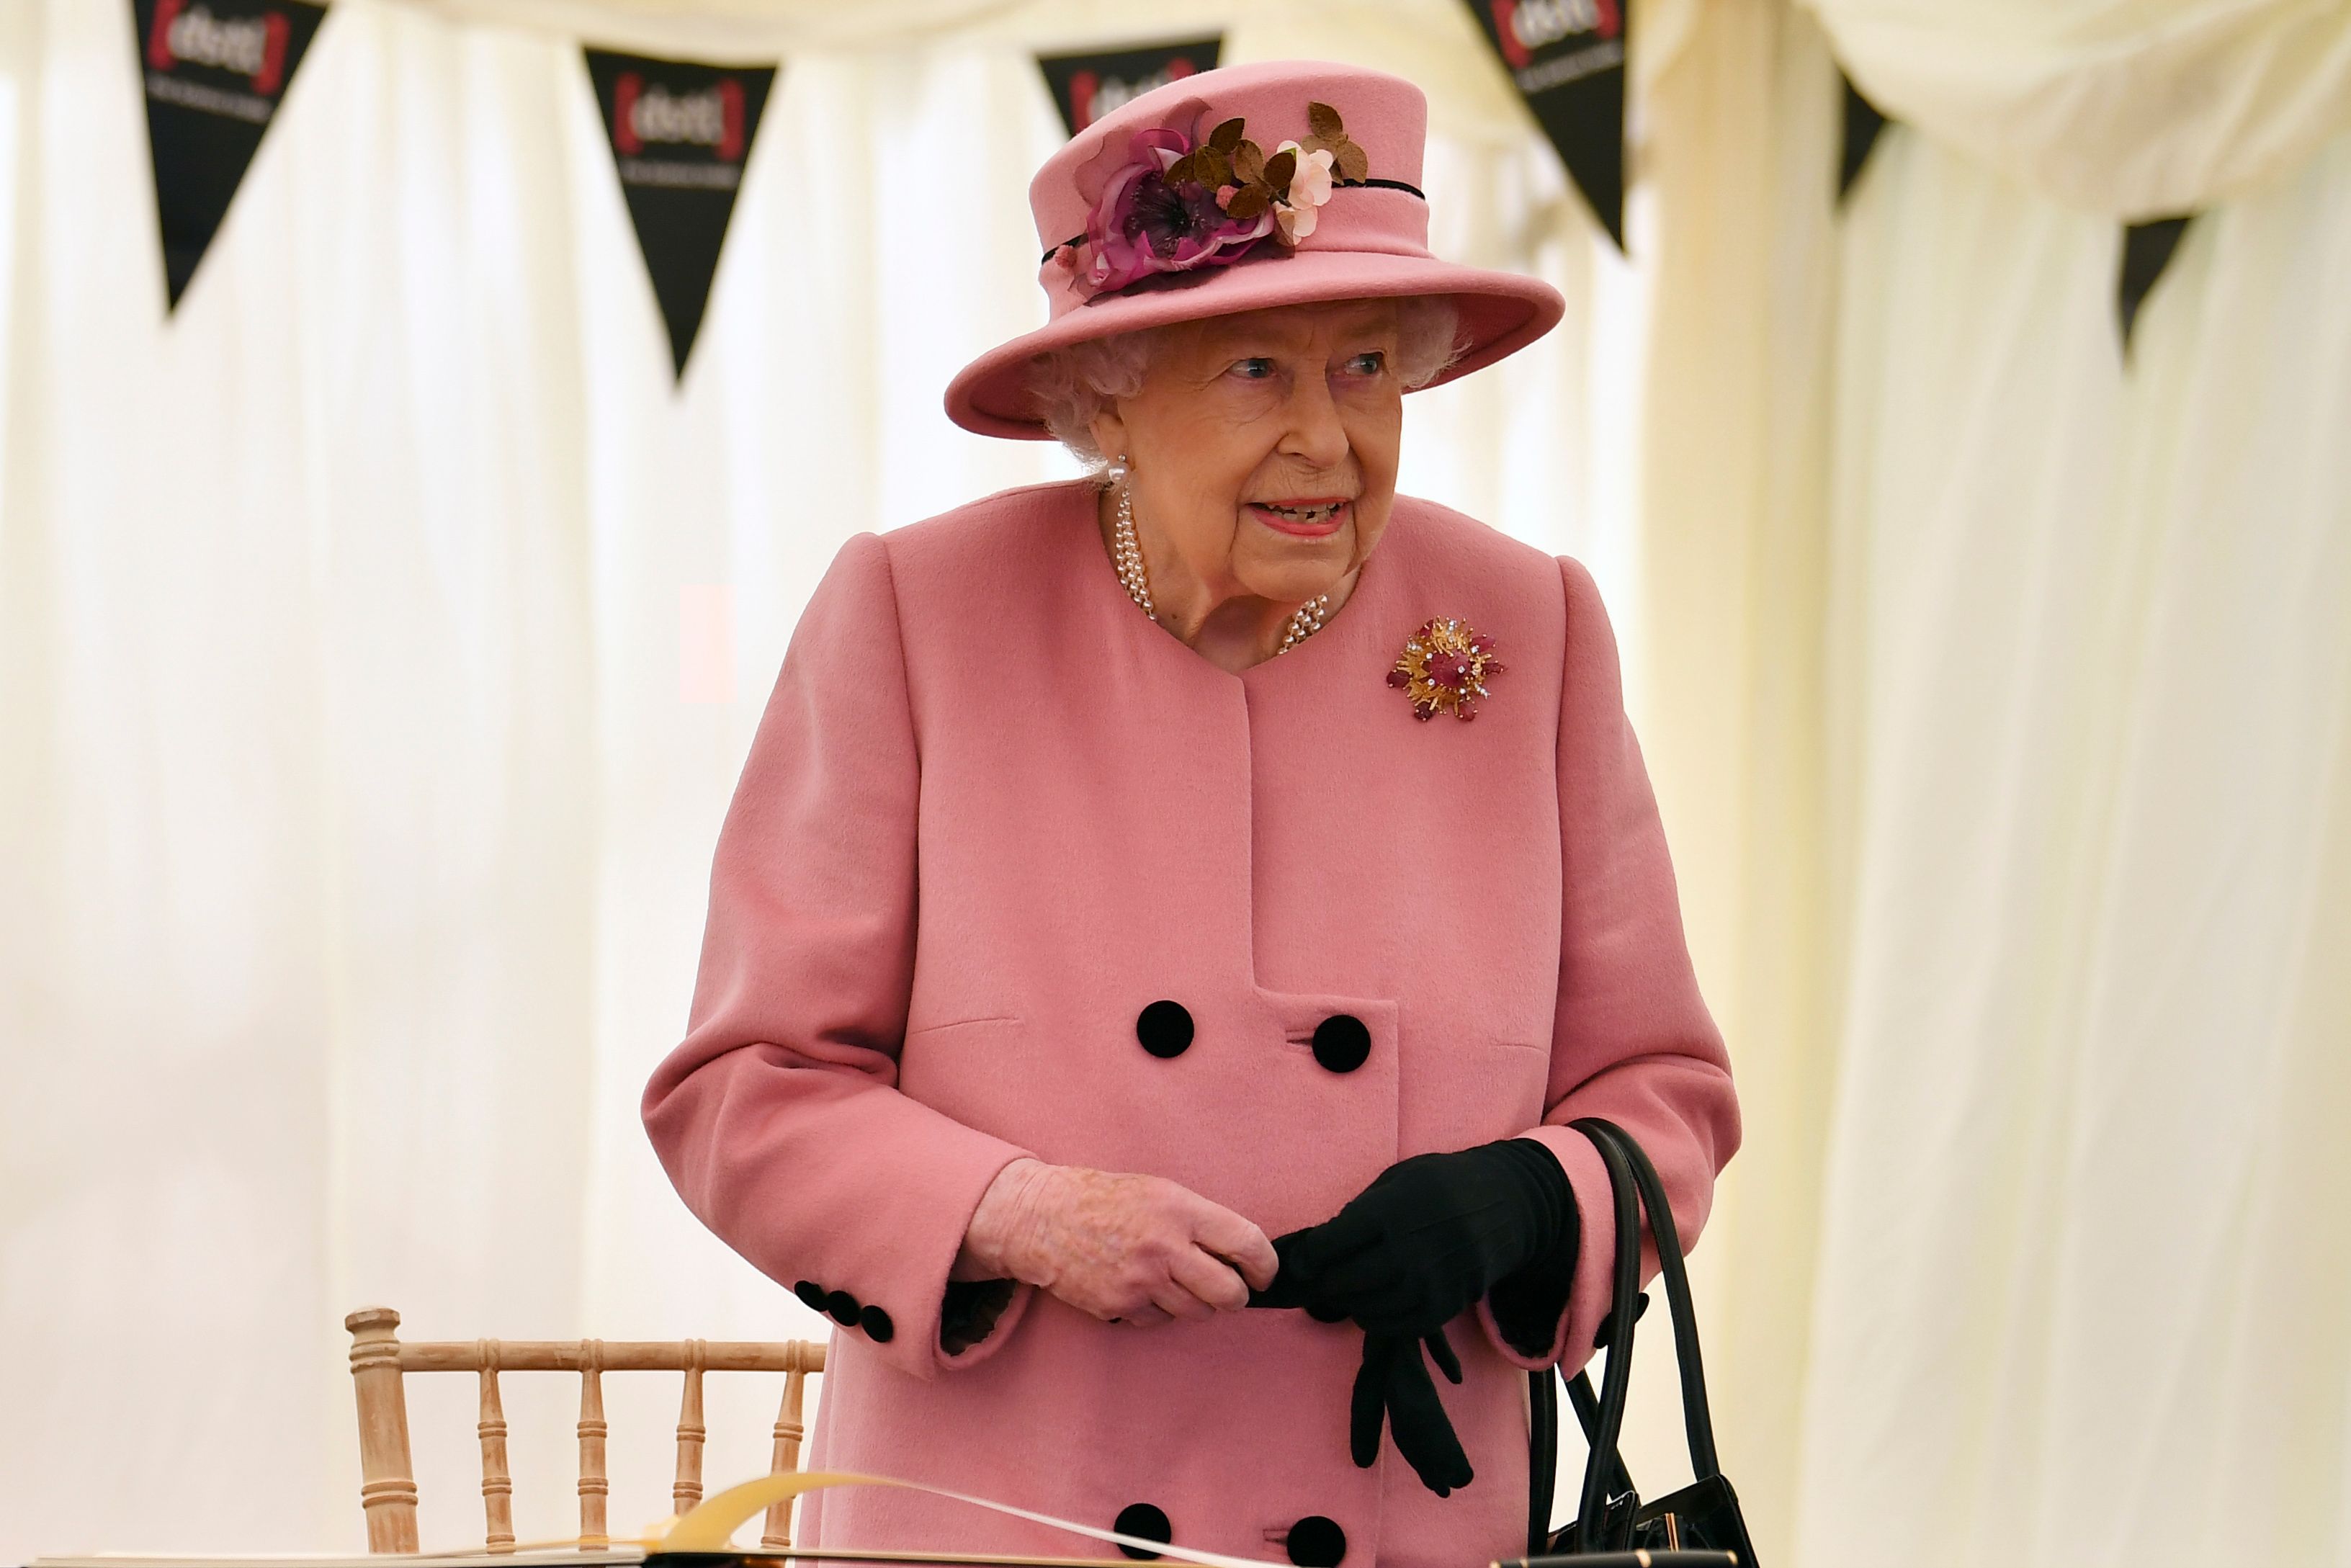 Queen Elizabeth during a visit to the Defence Science and Technology Laboratory (Dstl) at Porton Down science park on October 15, 2020. | Getty Images